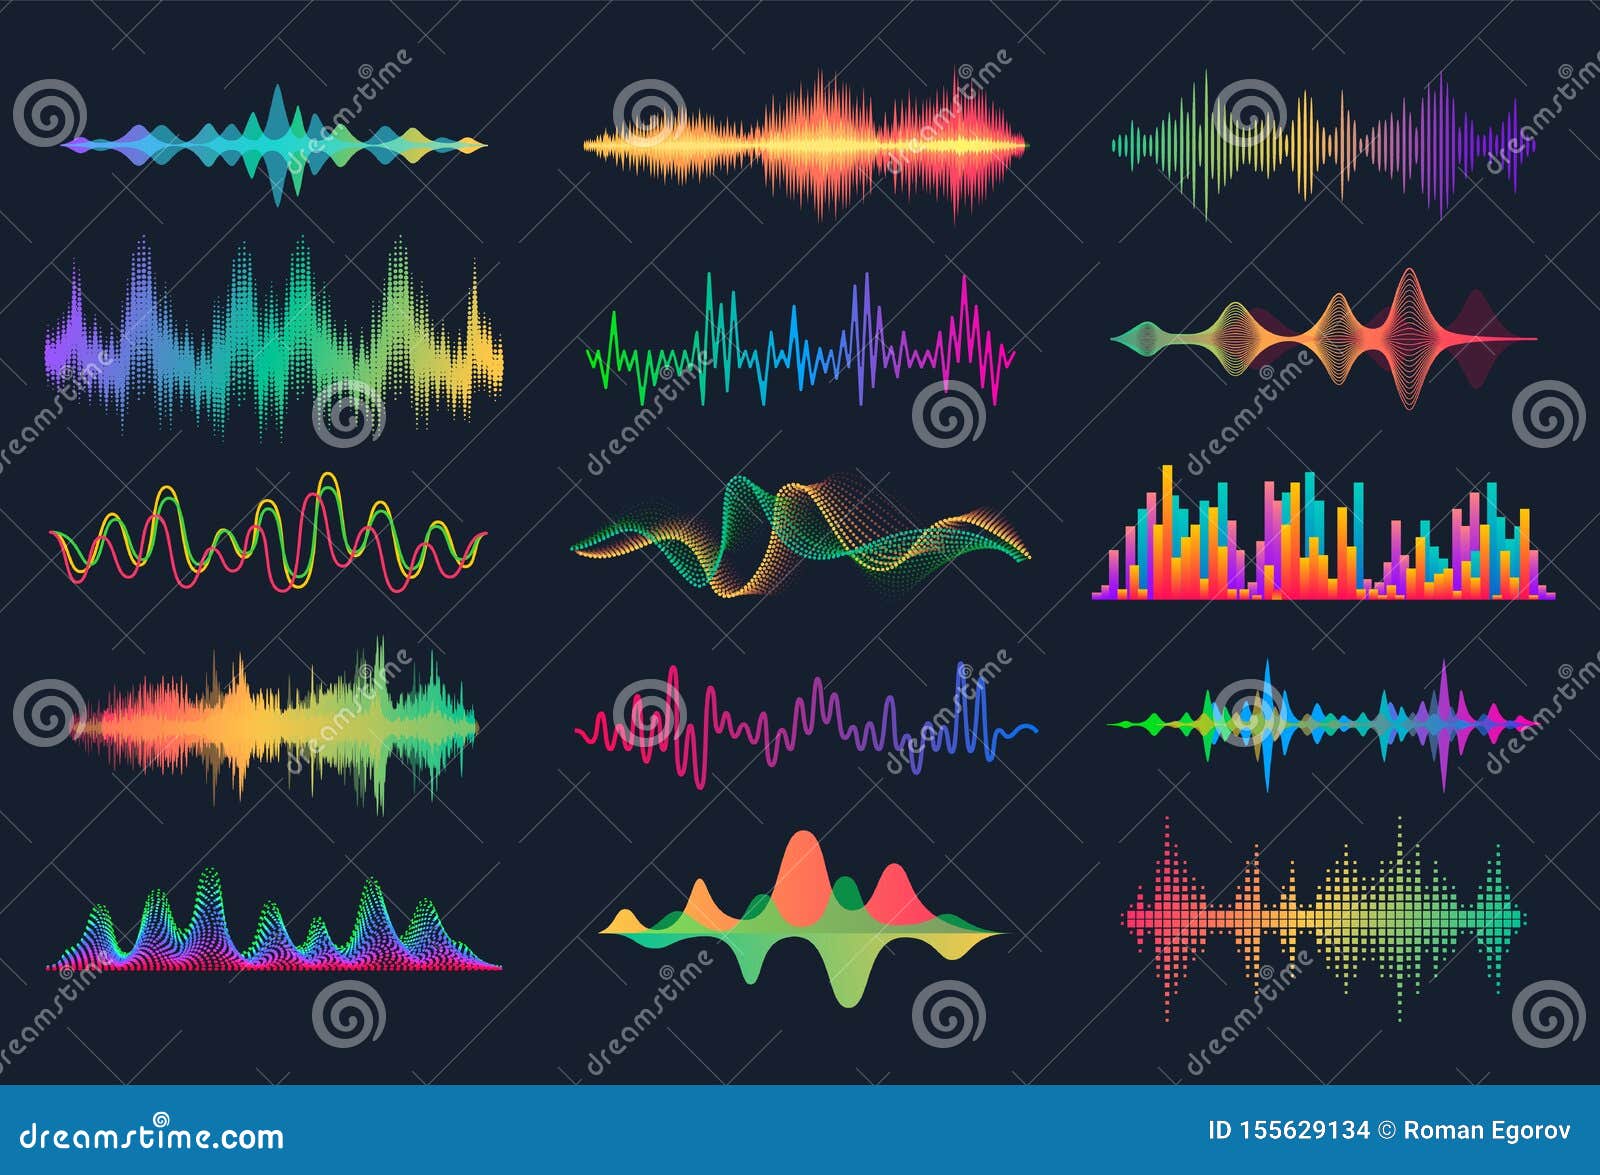 sound waves. frequency audio waveform, music wave hud interface s, voice graph signal.  audio wave set